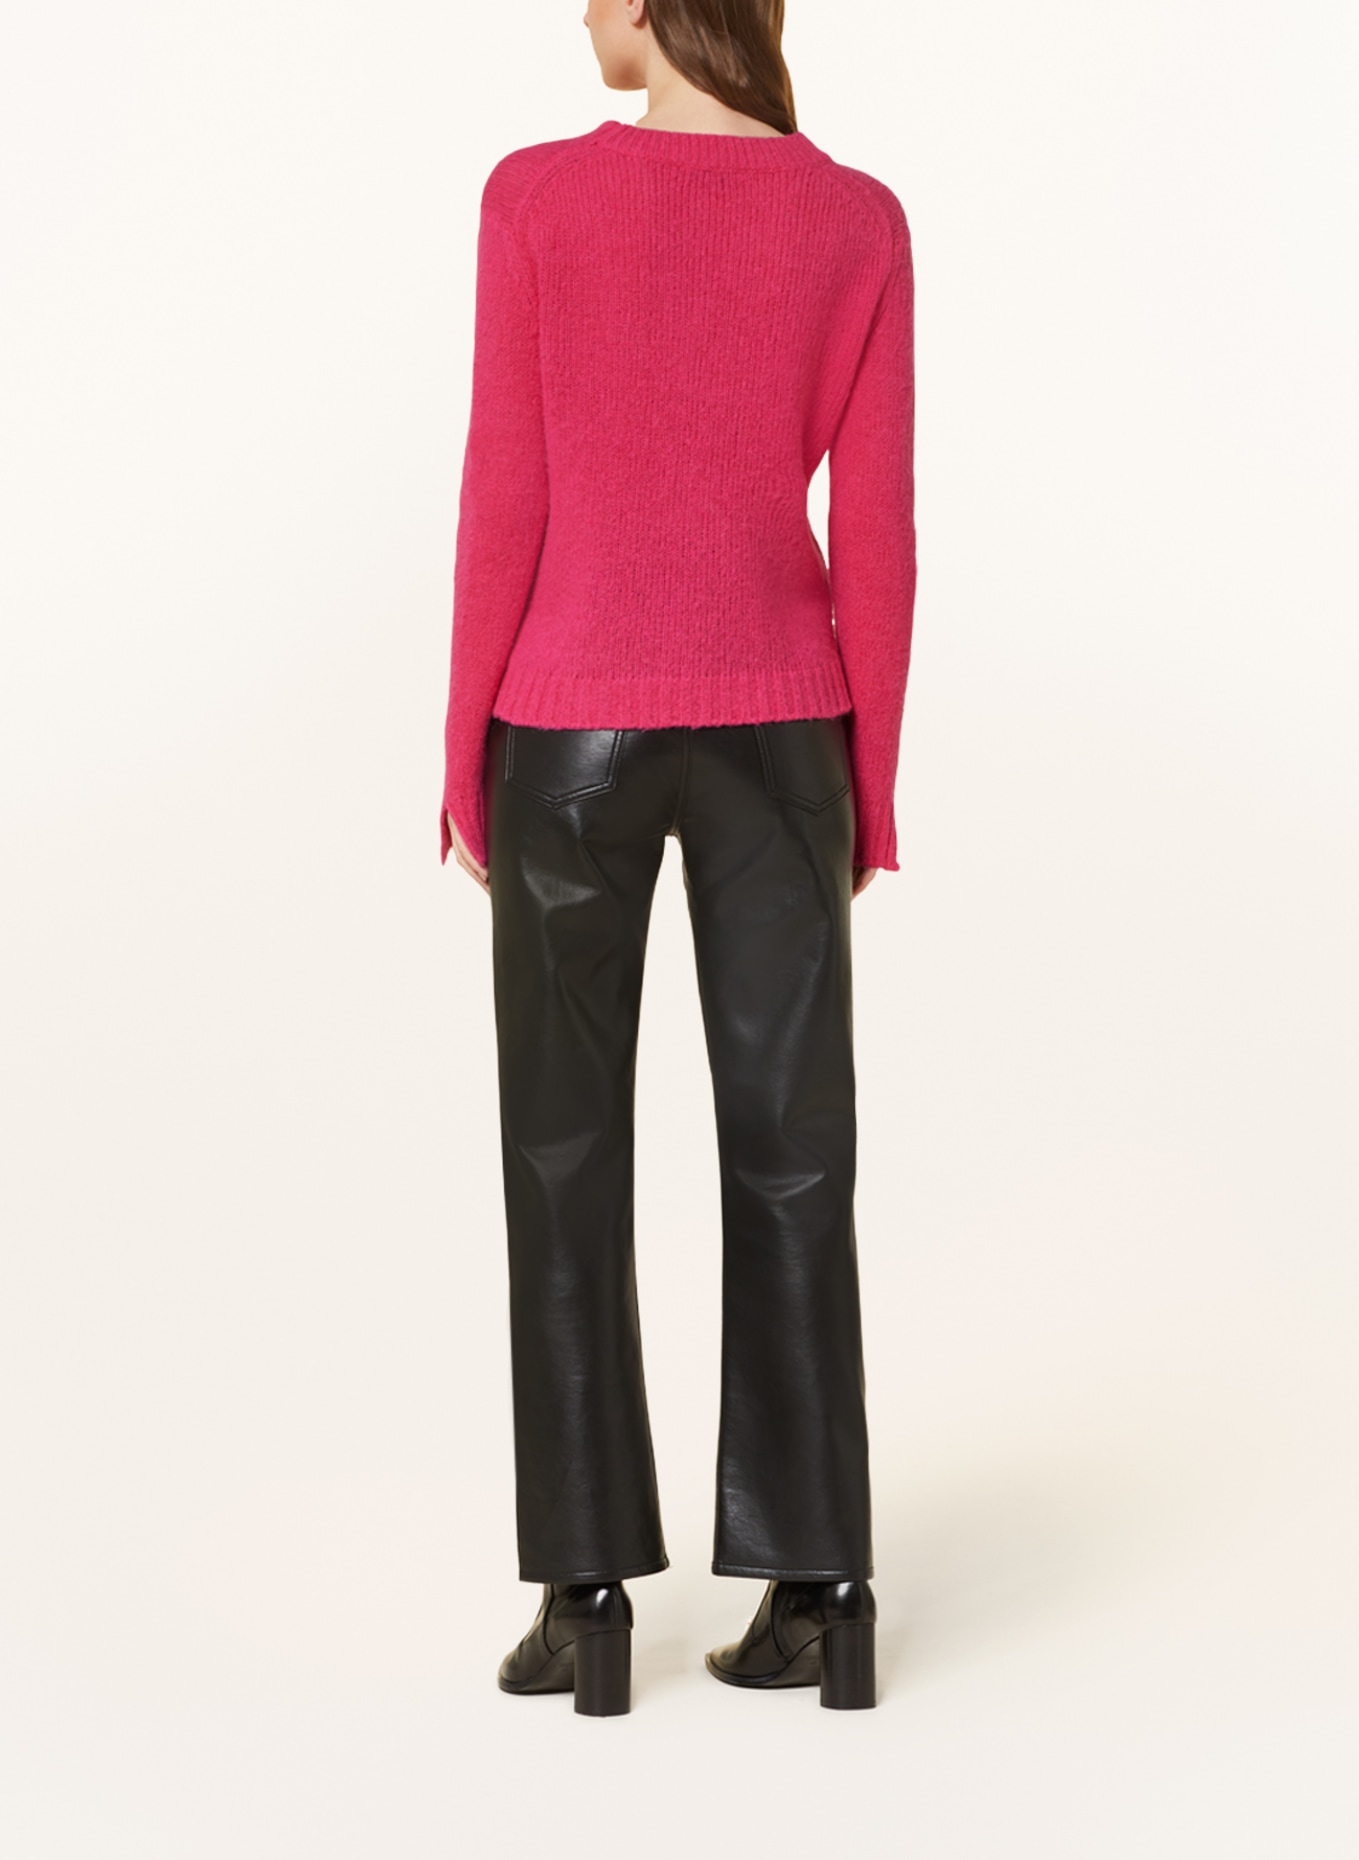 Princess GOES HOLLYWOOD Oversized-Pullover, Farbe: PINK (Bild 3)